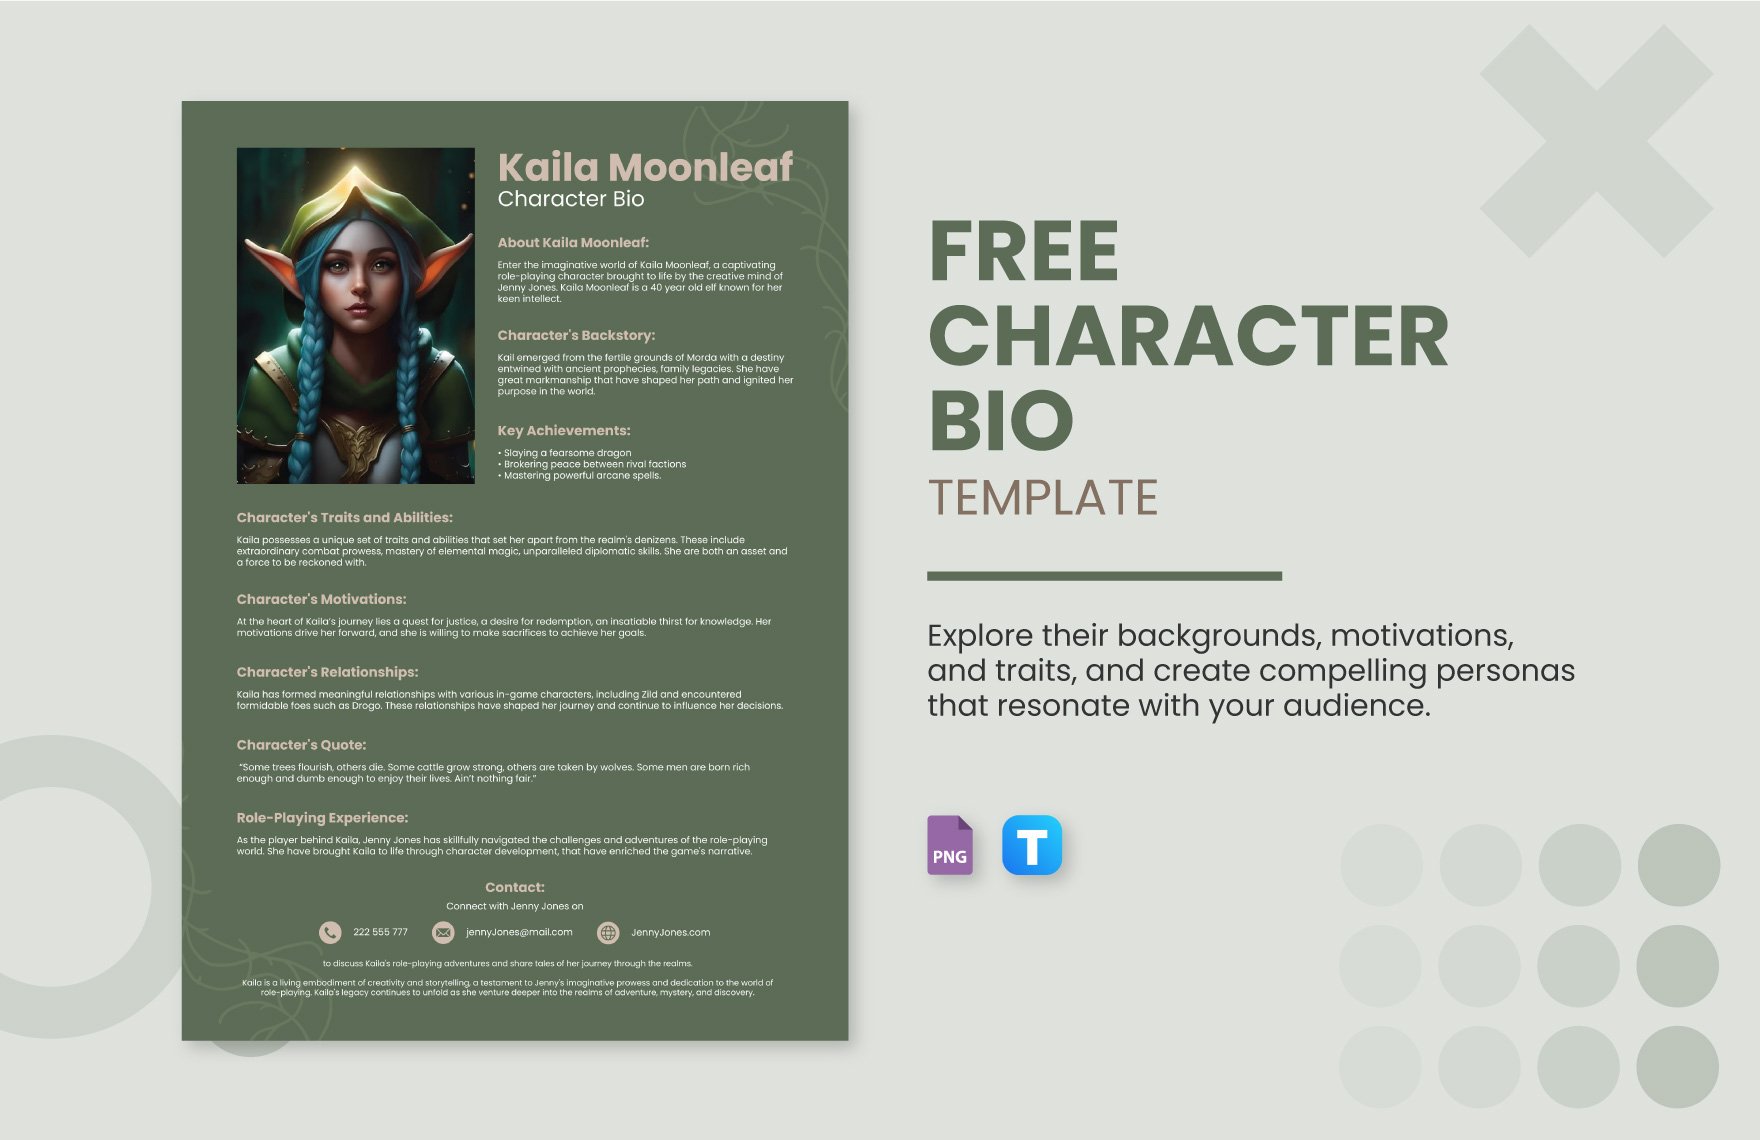 Free Character Bio Template in PNG